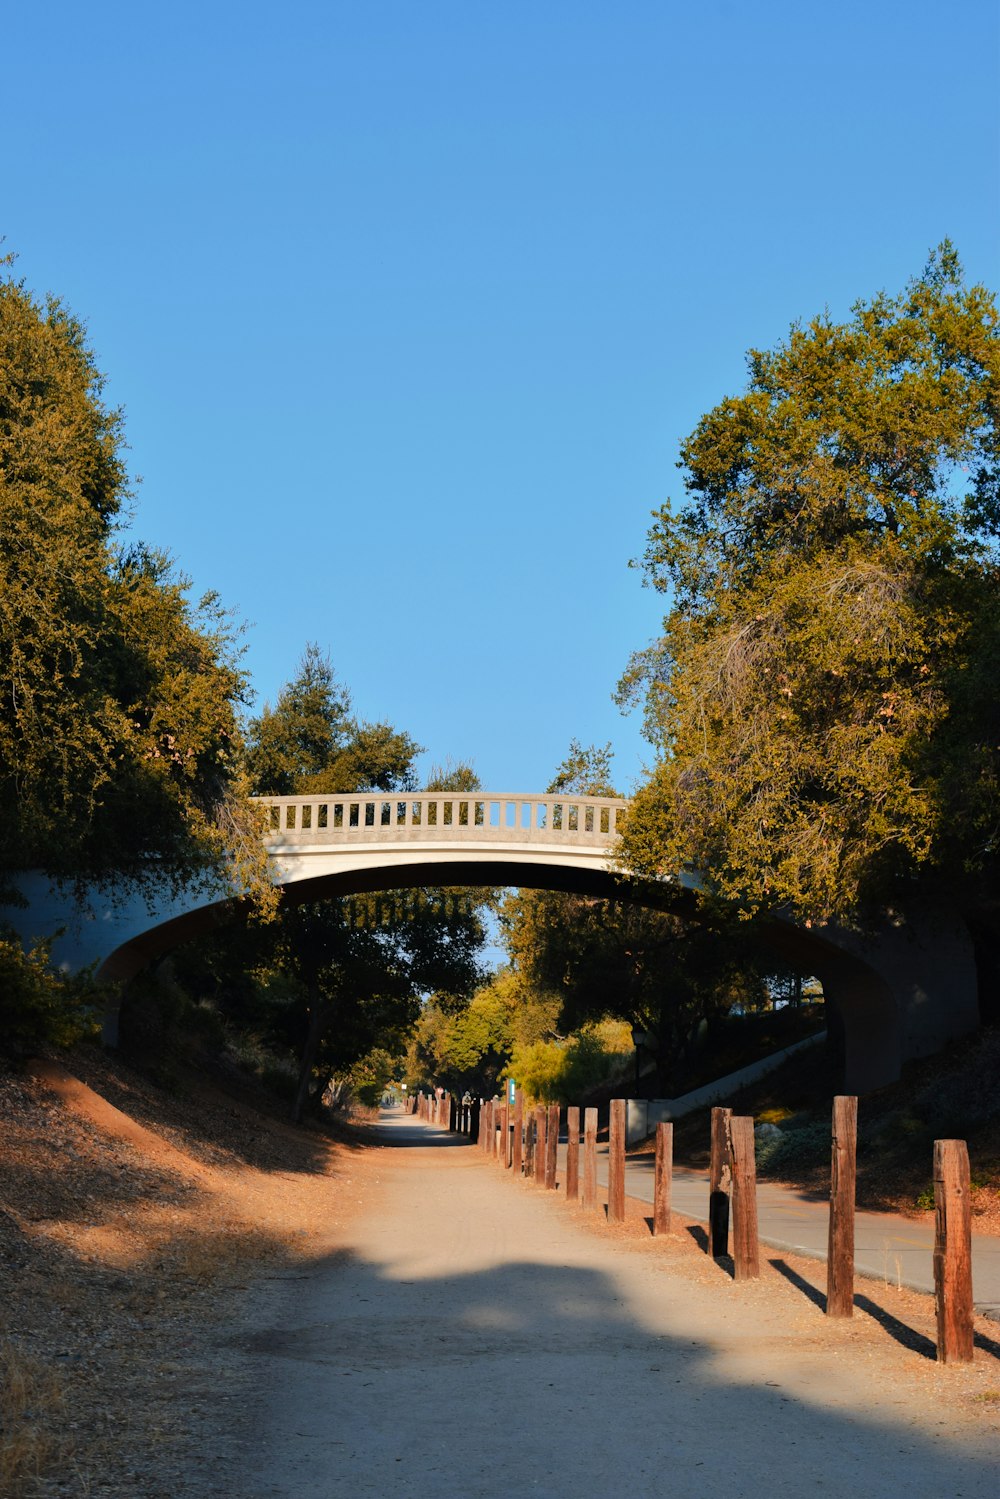 a bridge over a dirt road surrounded by trees